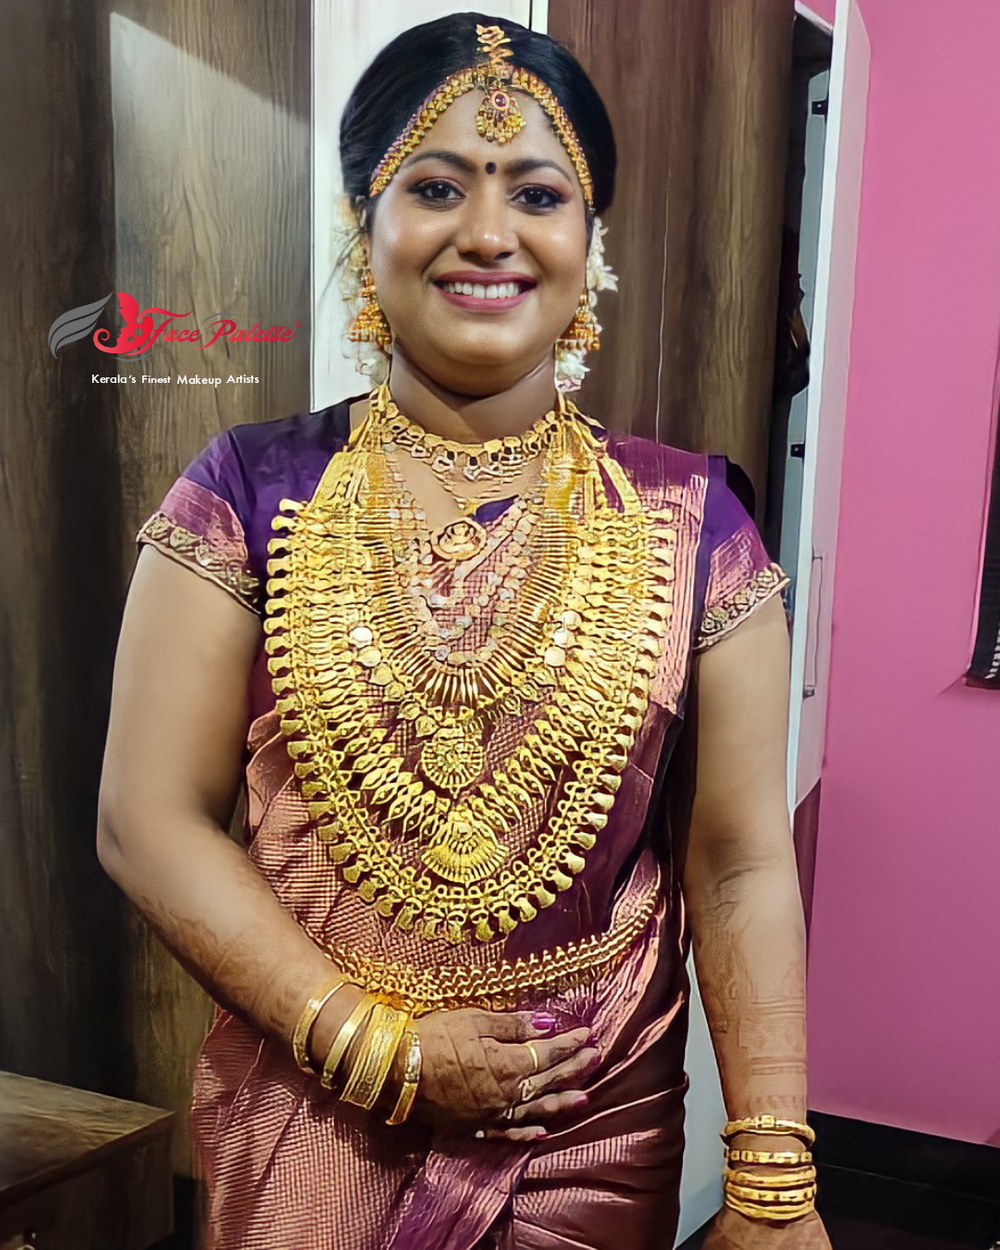 Photo From Hindu Bridal Makeup - By Face Palette